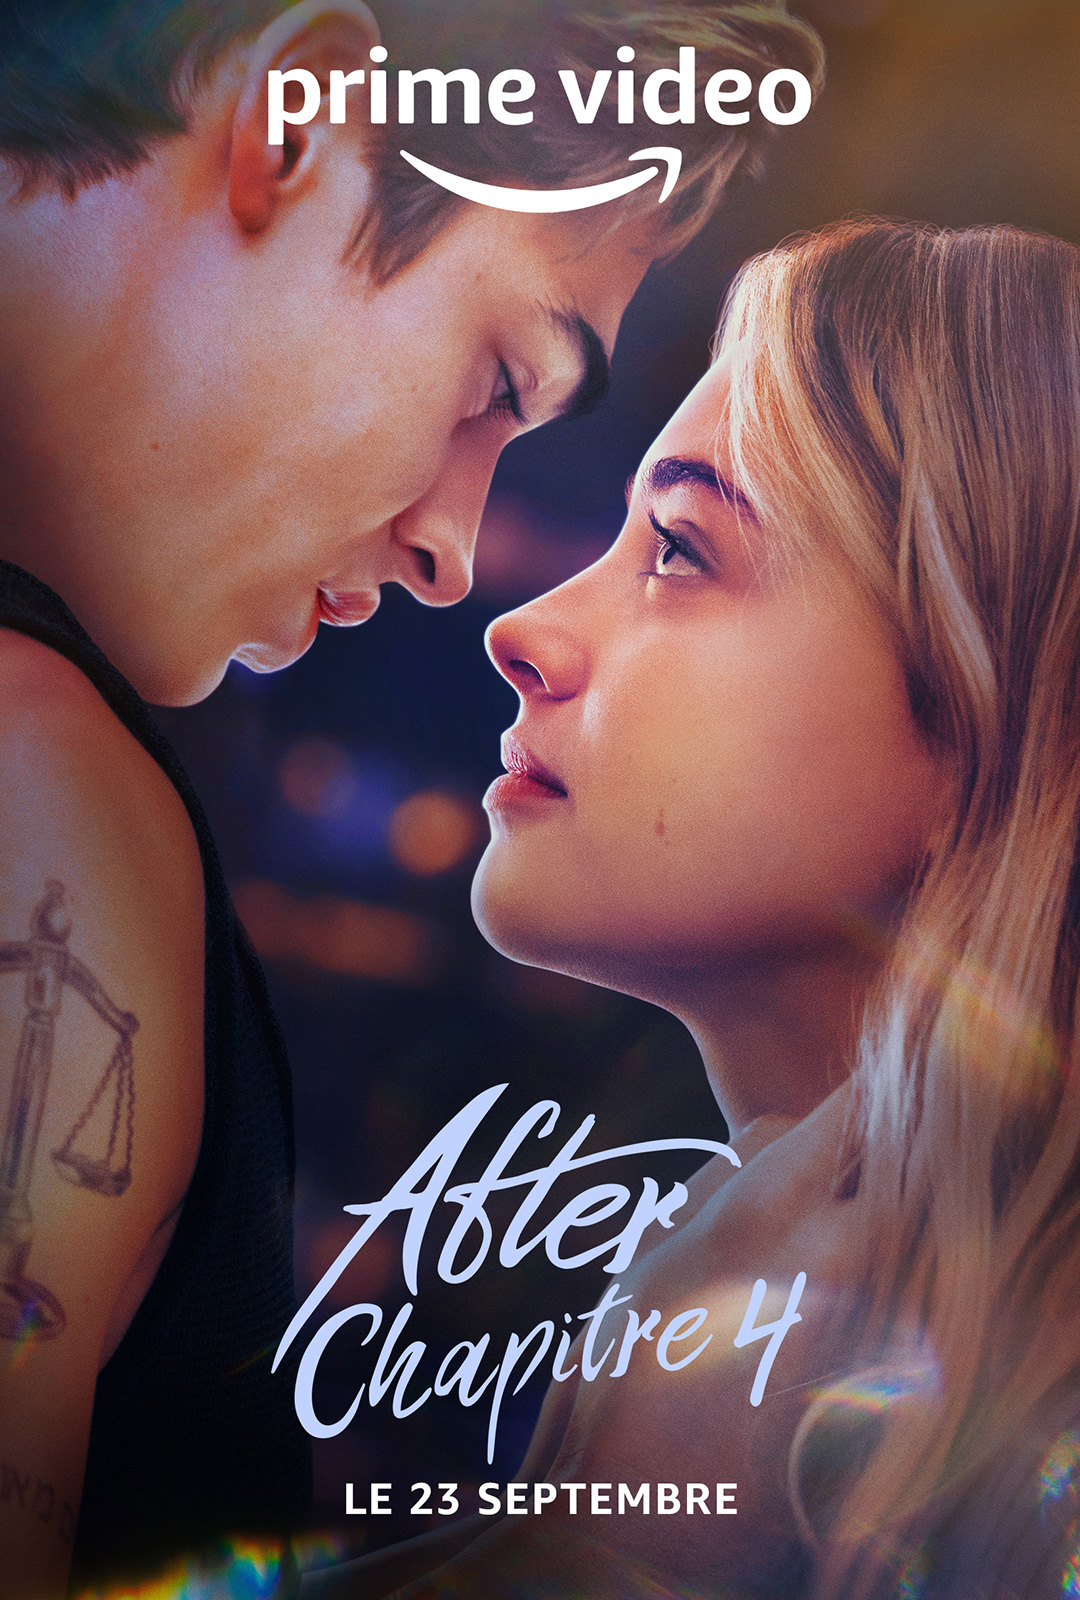 After - Chapitre 4 streaming fr